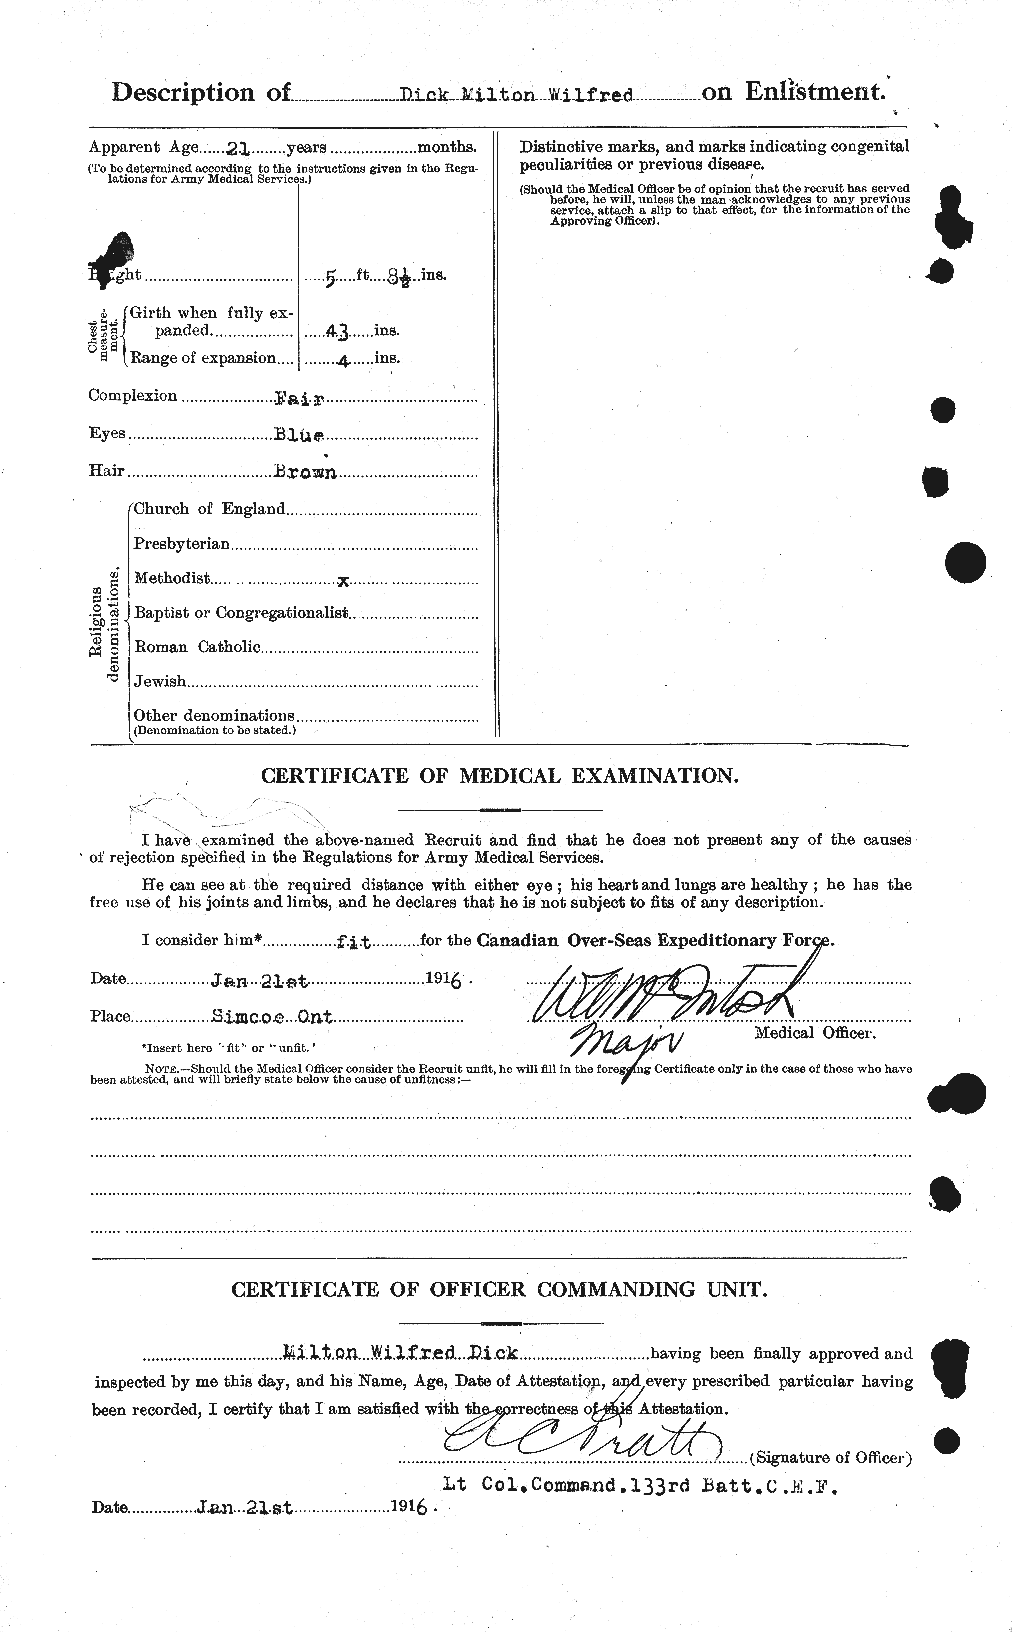 Personnel Records of the First World War - CEF 290536b